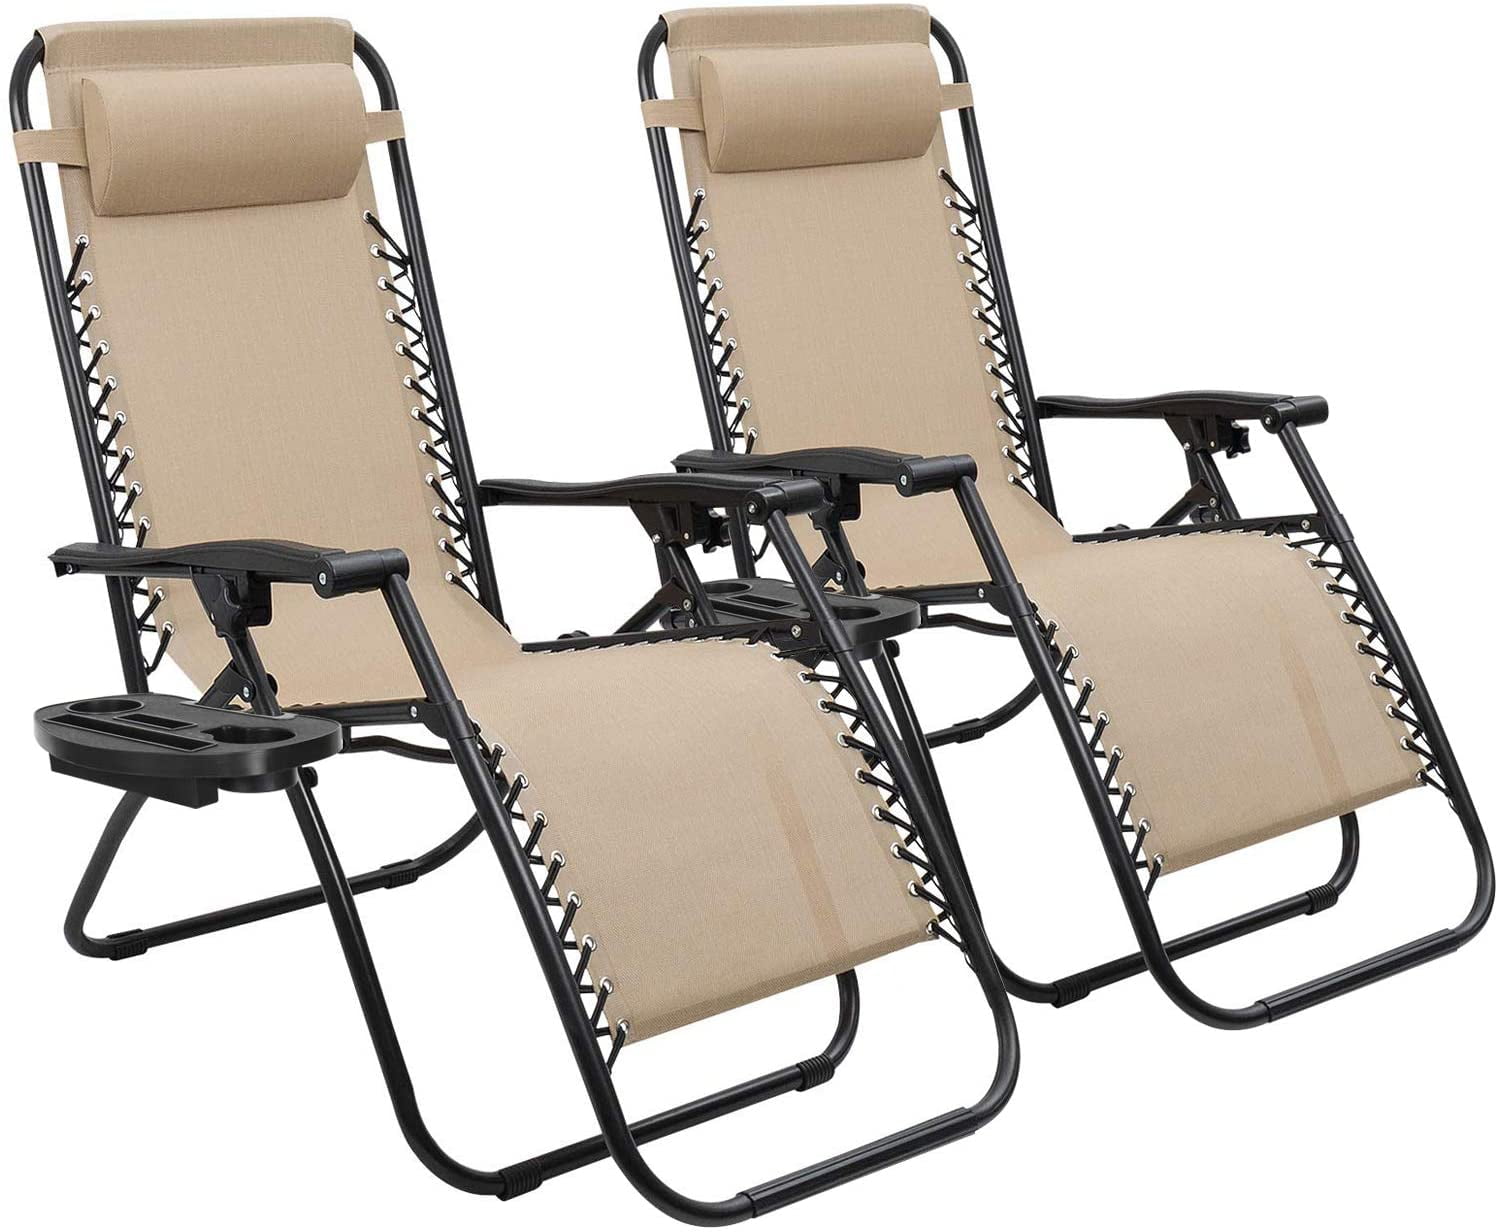 Details about   Set Of 2 Zero Gravity Chairs Adjustable Recliner Folding Lounge Patio w/Tray Tan 